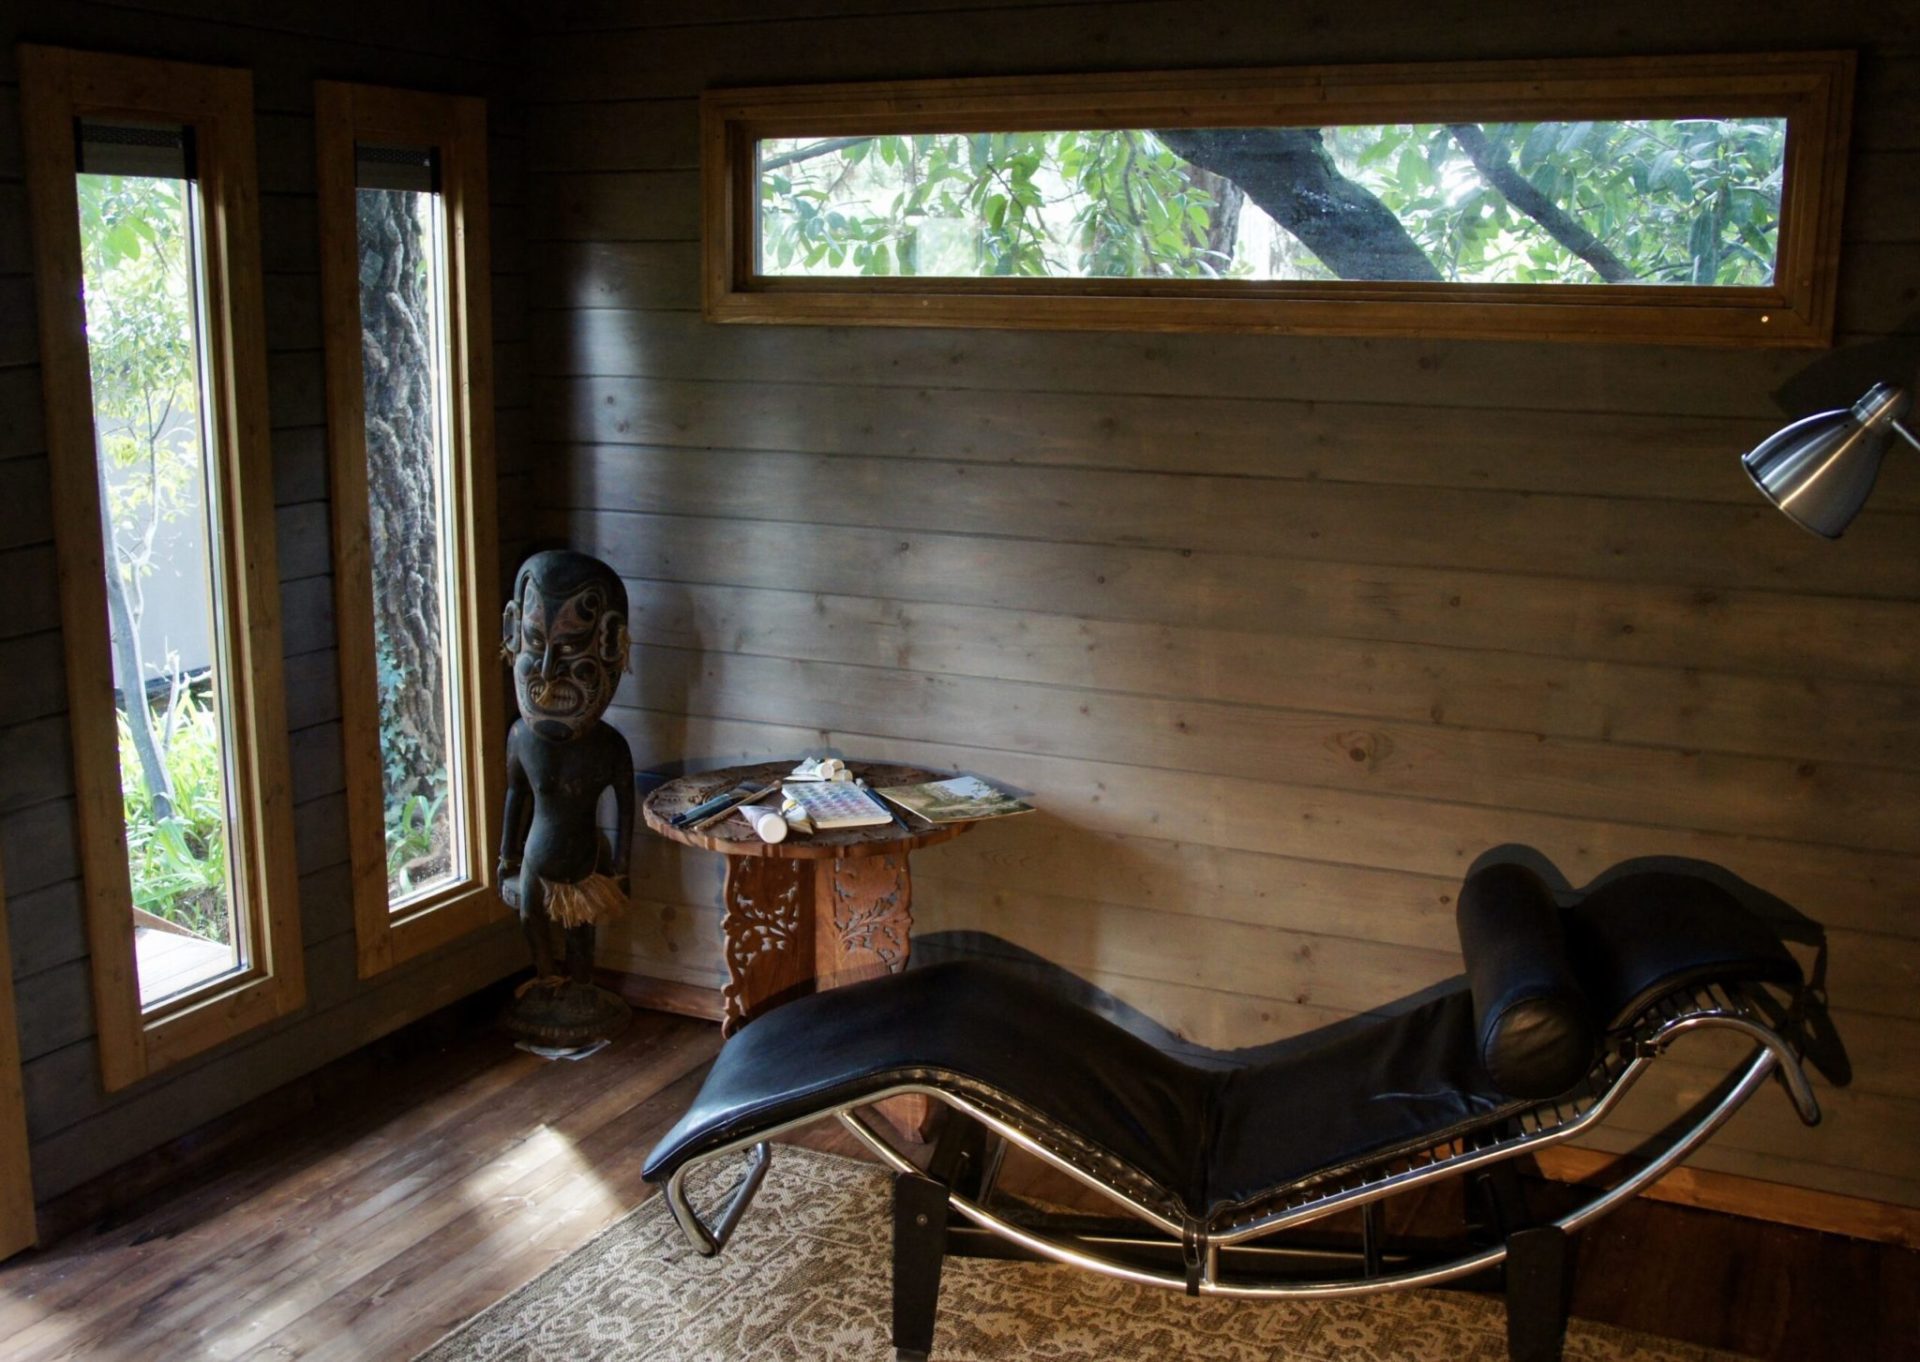 Relaxation retreat in the gumtrees